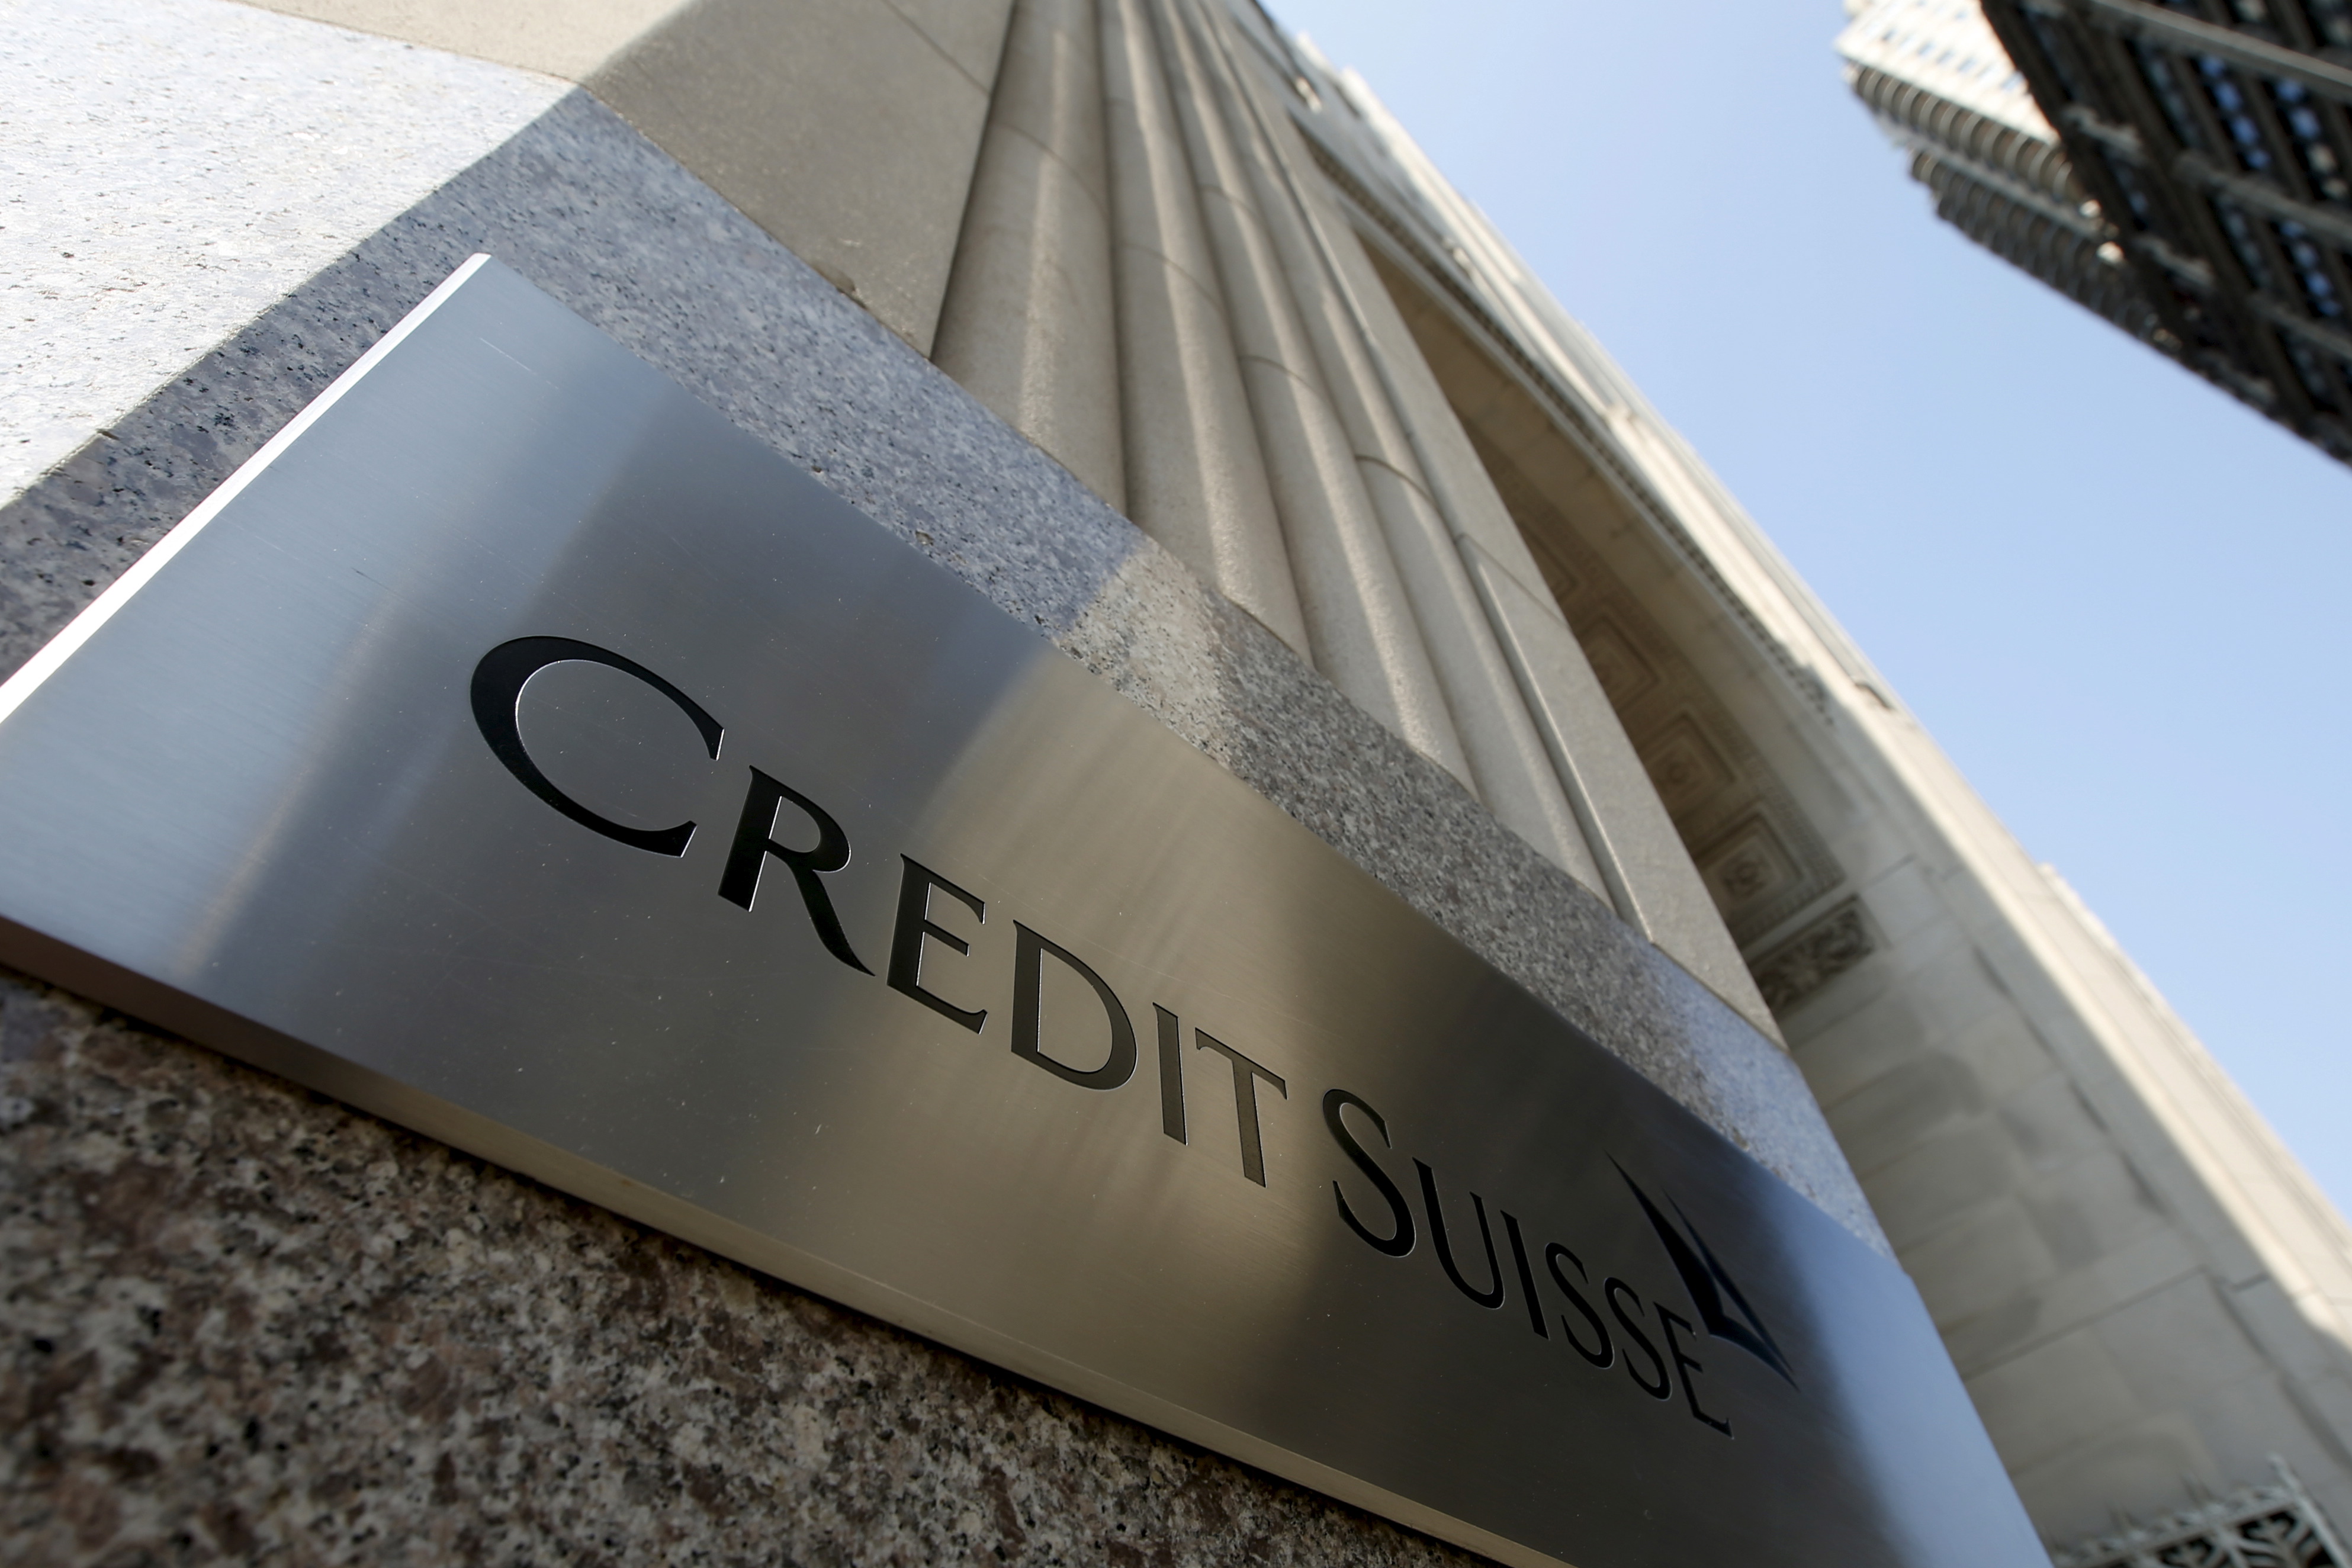 A Credit Suisse sign is seen on the exterior of their Americas headquarters in the Manhattan borough of New York City